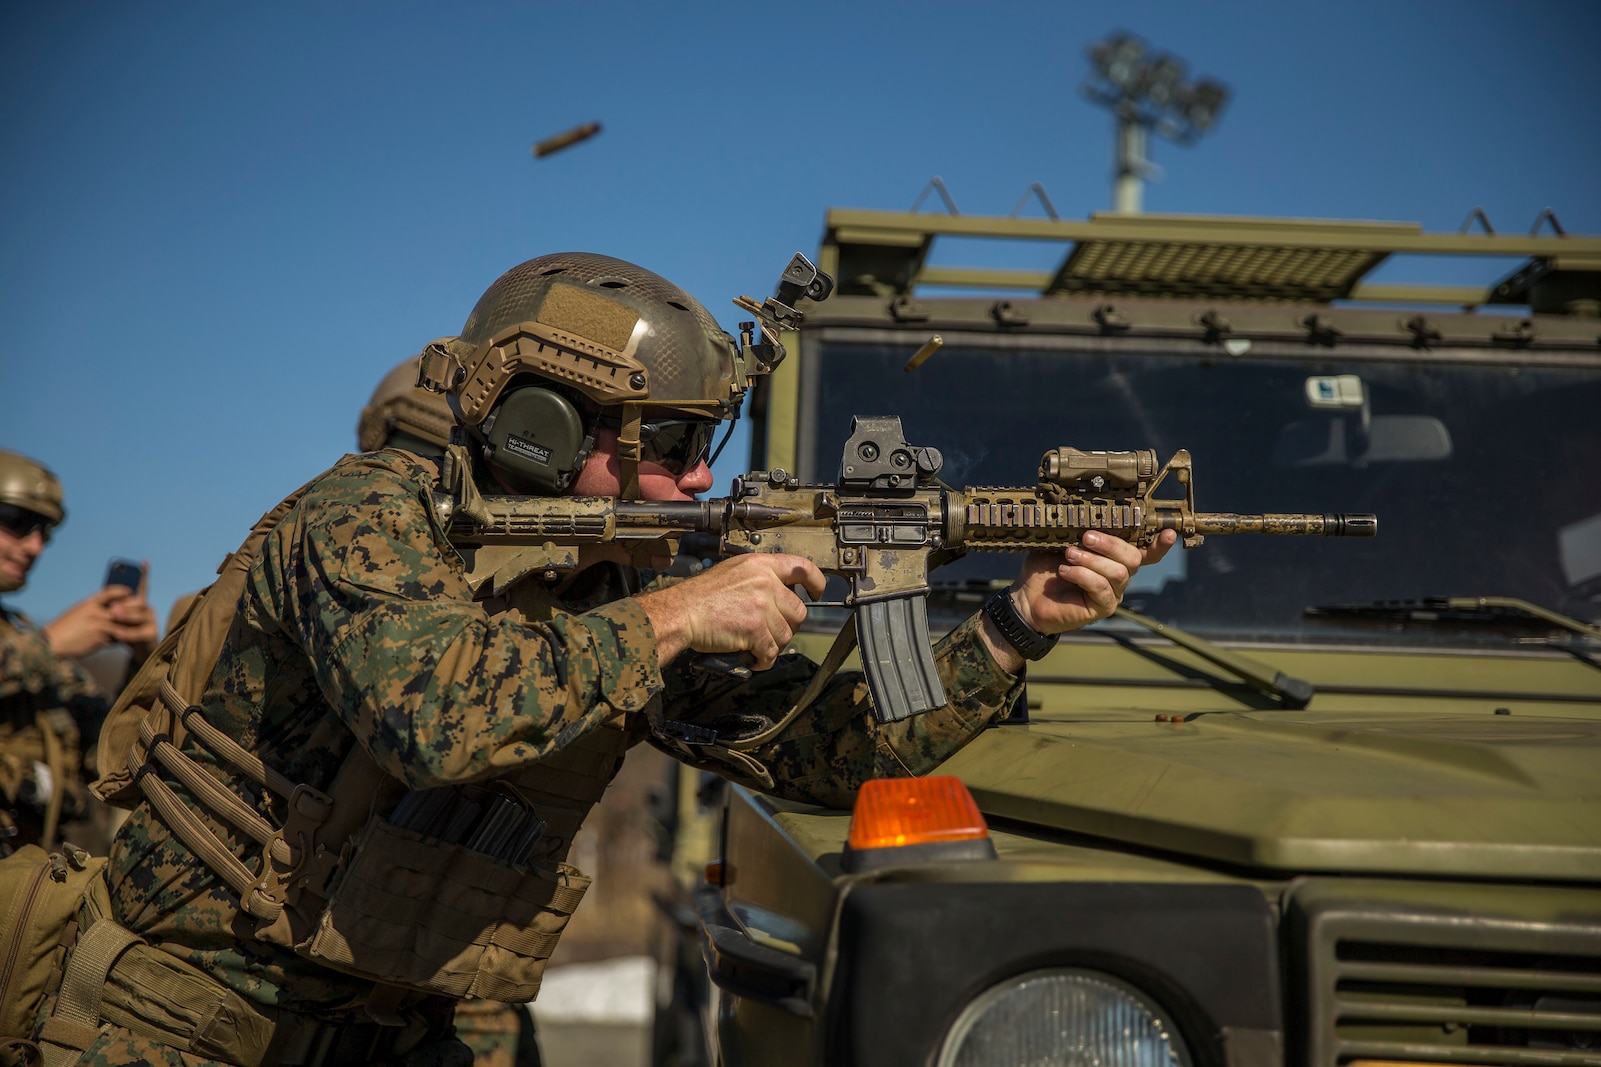 A U.S. Marine with 1st Platoon, 1st Reconnaissance Battalion, 1st Marine Division, conducts barrier shooting drills during Exercise Platinum Ren at Fort Trondennes, Harstad, Norway, May 10, 2018.